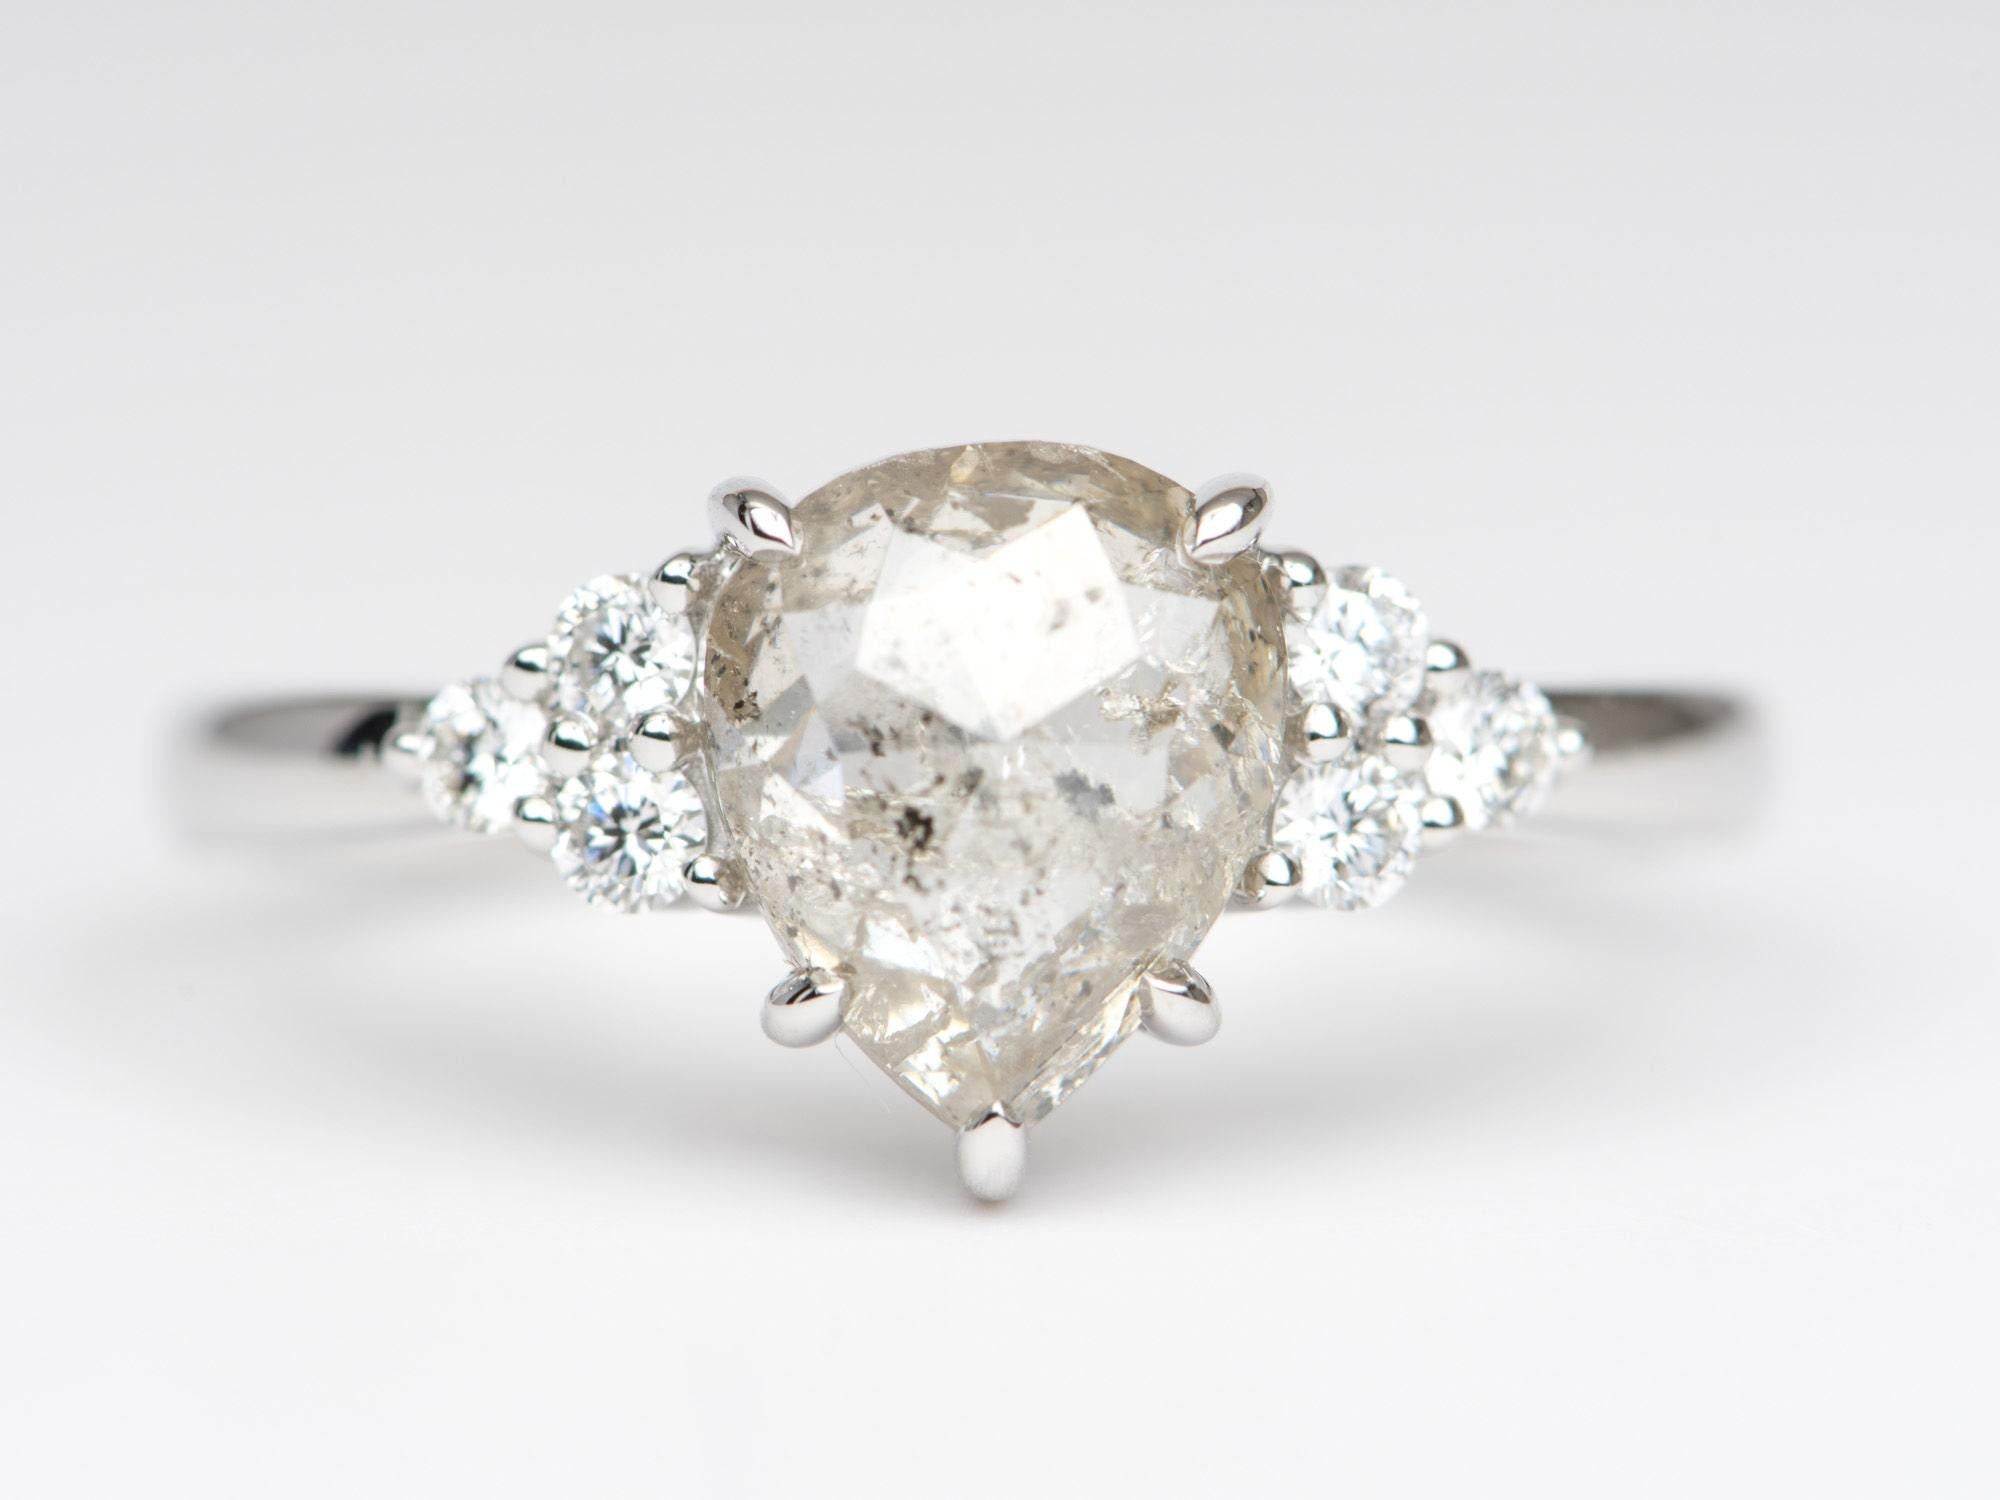 â™¥Â A clear celestial pear-shaped diamond with trio diamond sides
â™¥ Solid 14k white gold ring set with a beautiful pear-shaped diamond

â™¥ US Size 7 (Free resizing up or down 1 size)
â™¥ Gemstone: Diamond, 1.61ct; diamond, 0.17ct
â™¥ All